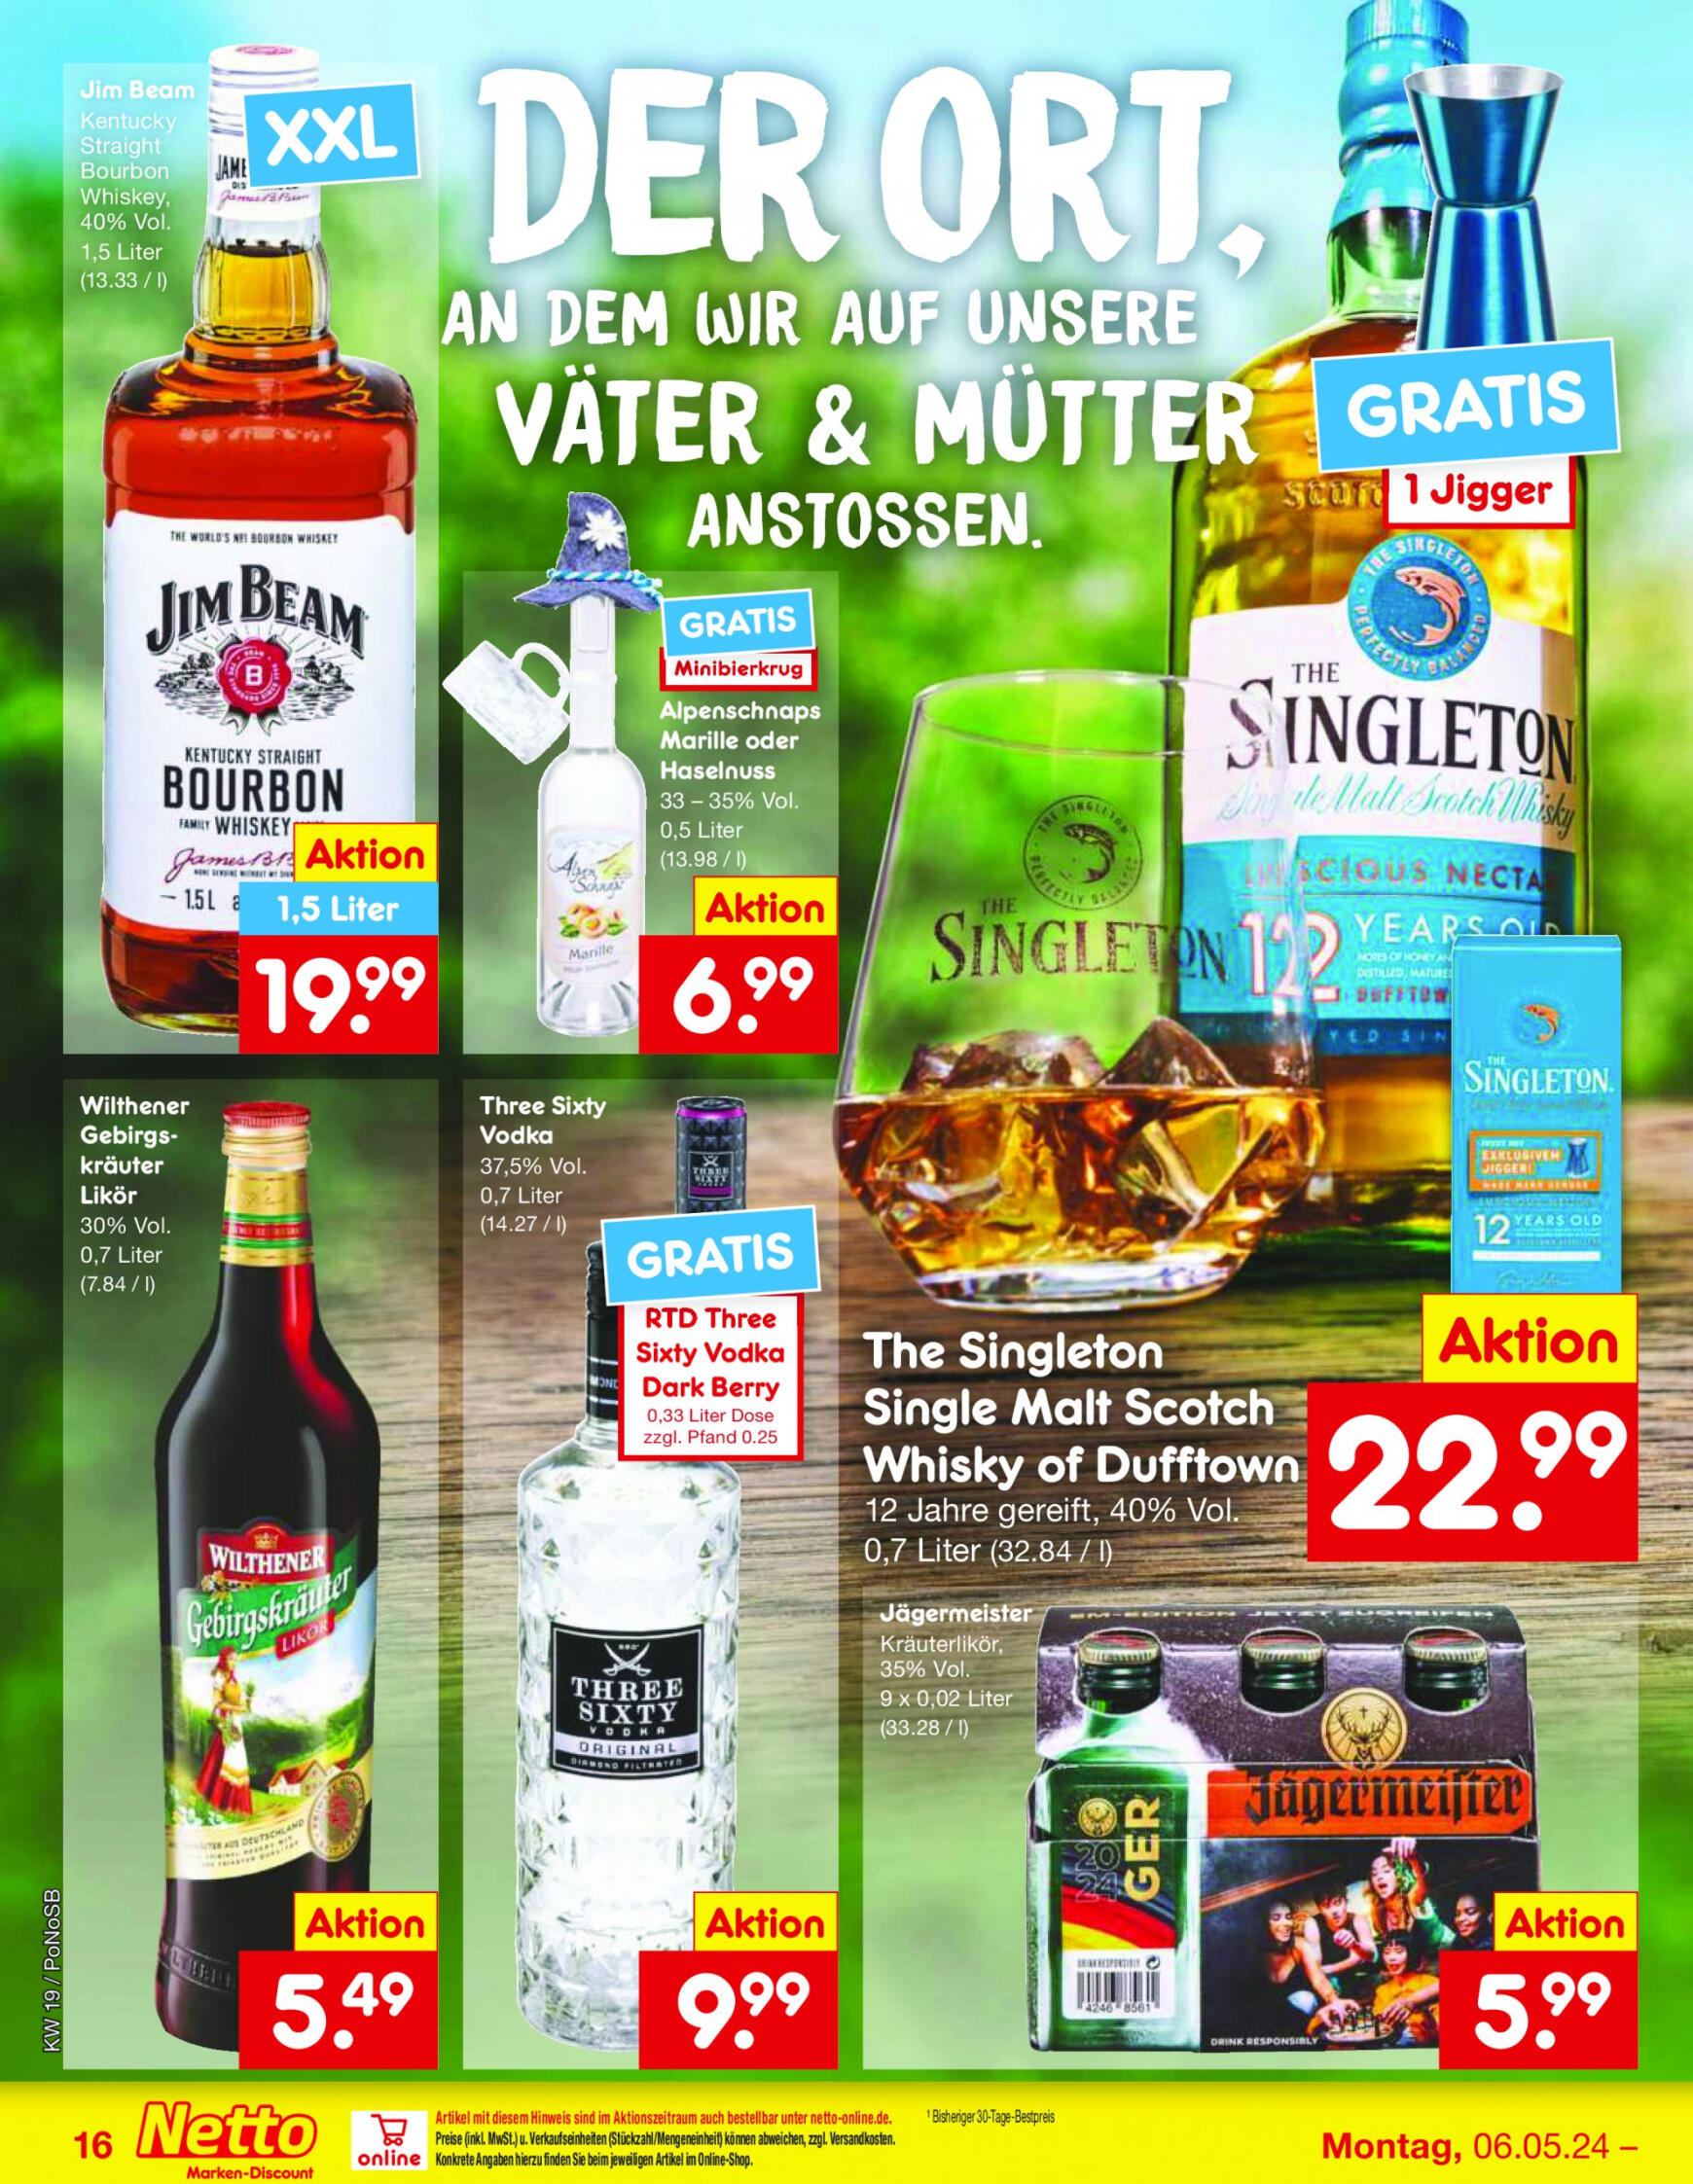 netto - Flyer Netto aktuell 06.05. - 11.05. - page: 24